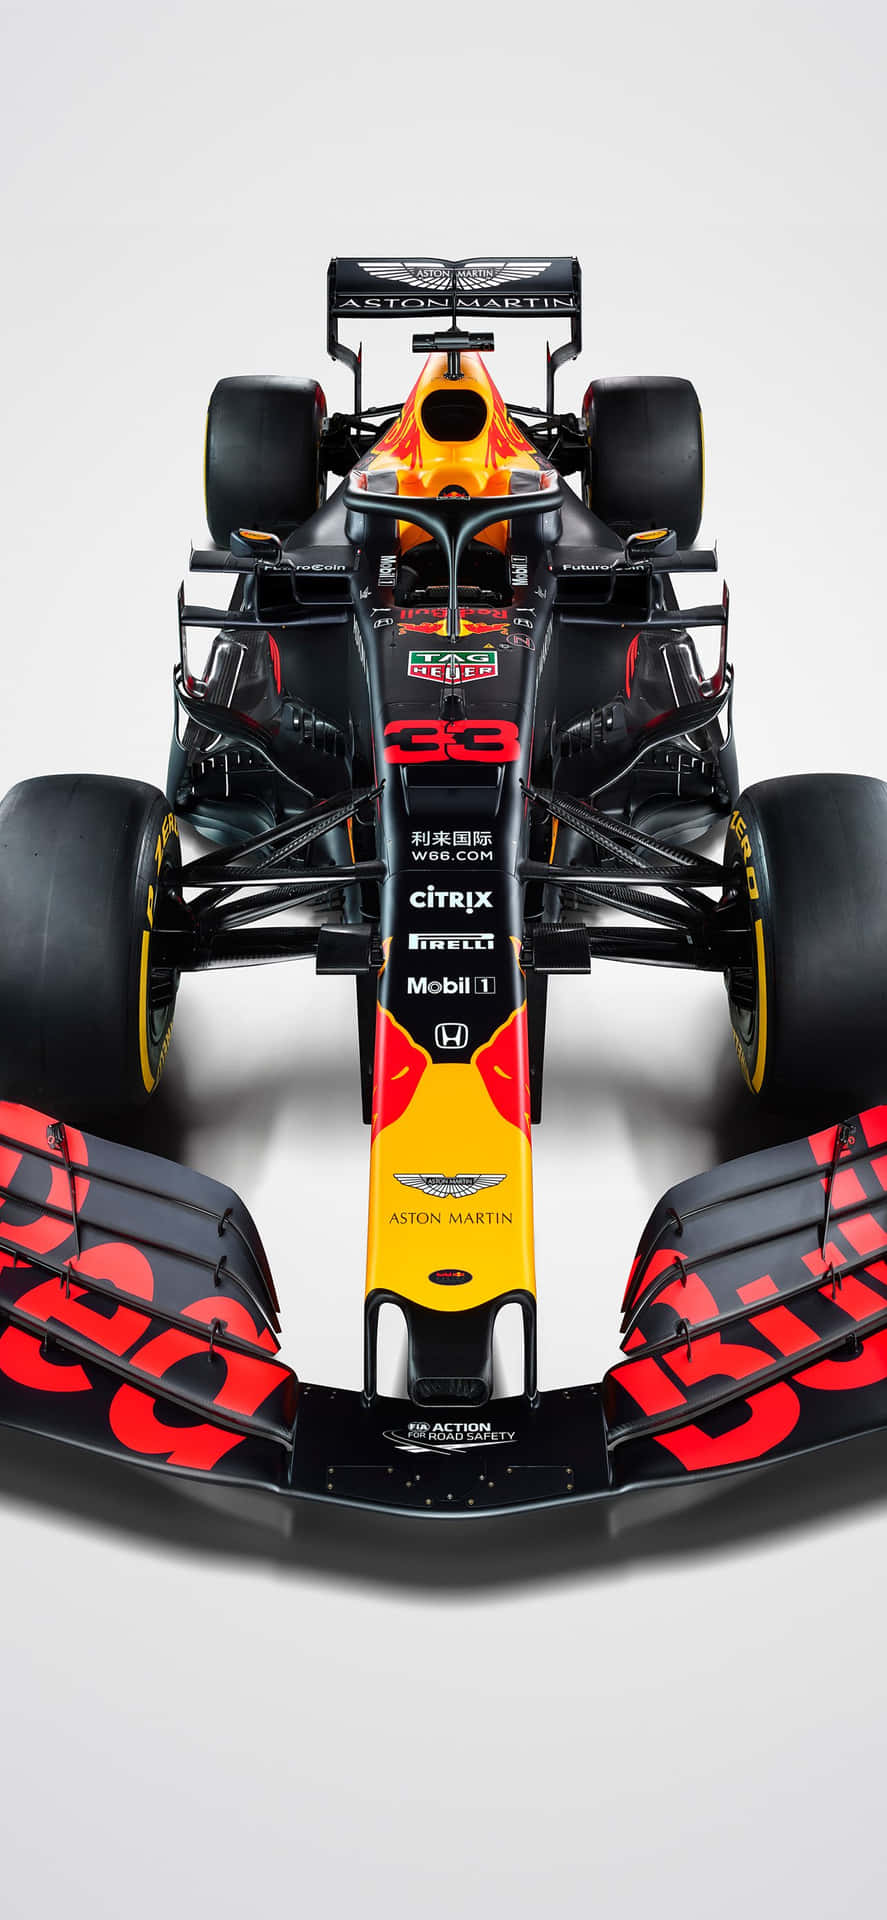 Enjoy a unique viewing experience with the Formula 1 iPhone Wallpaper